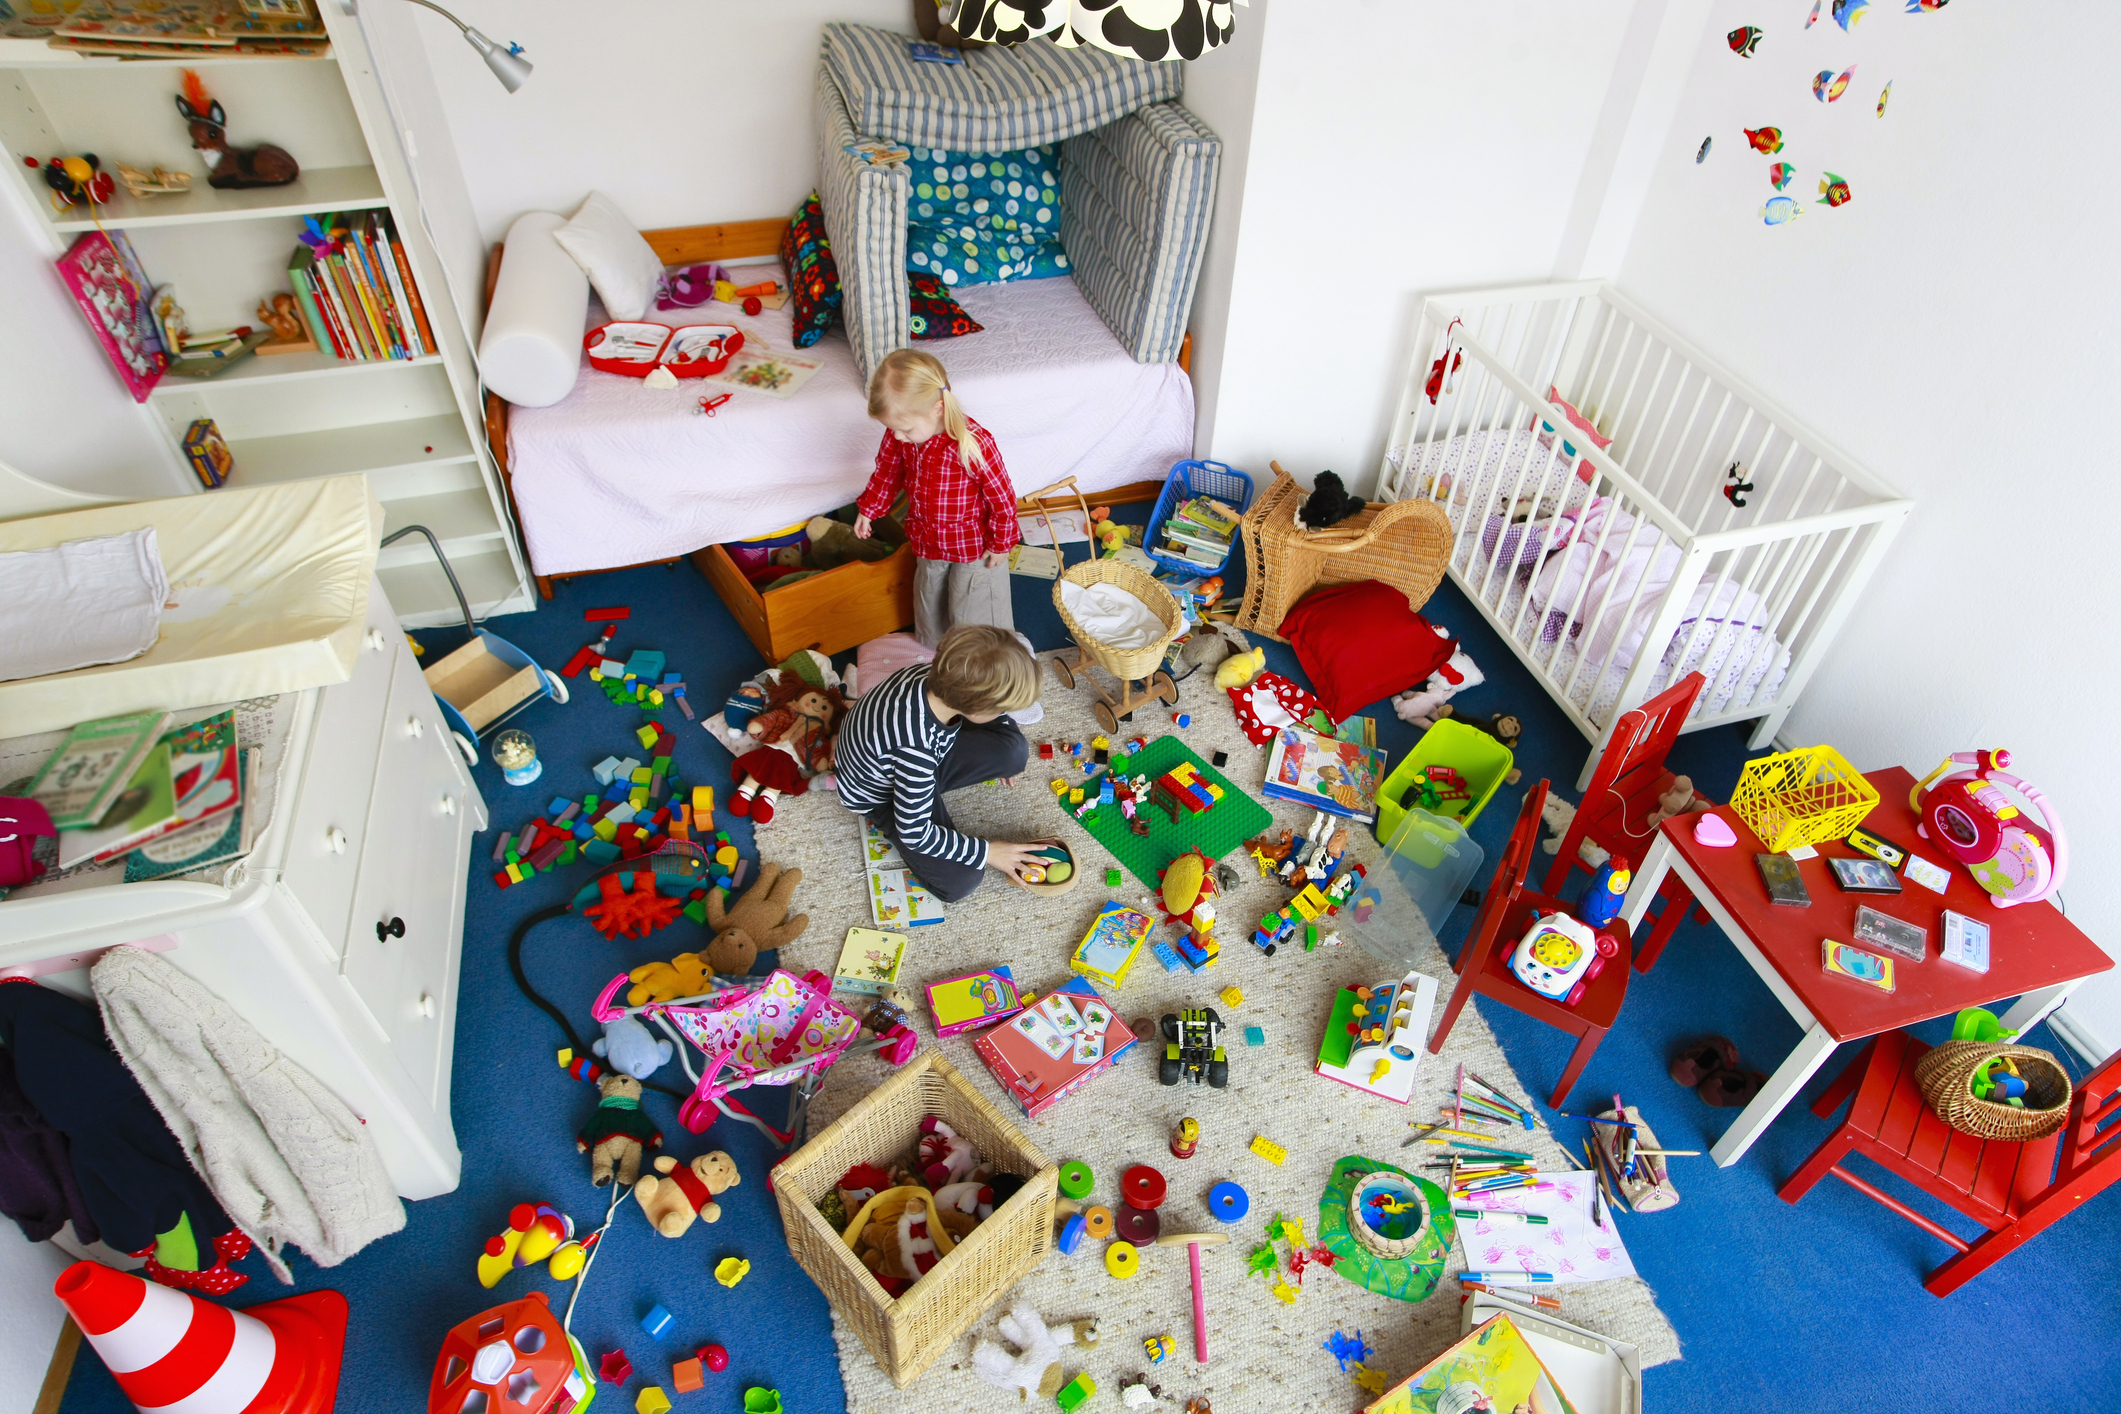 Two young children play in a cluttered room filled with toys, signaling a lively playtime environment